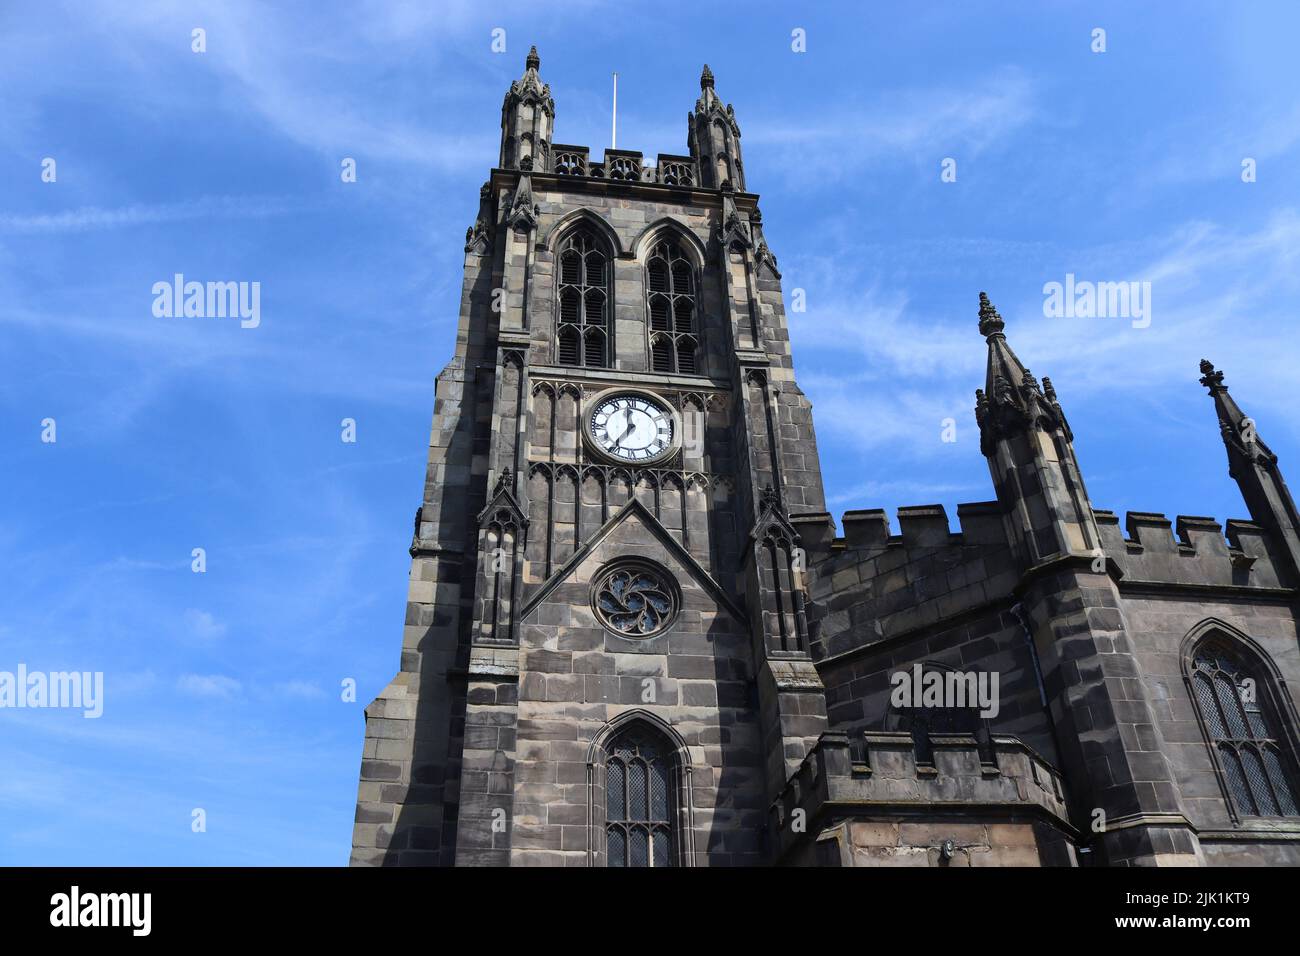 Exterior view of St.Mary's parish church in Stockport, Greater Manchester, England. Overlooking the market place this Grade 1 listed building is an ac Stock Photo